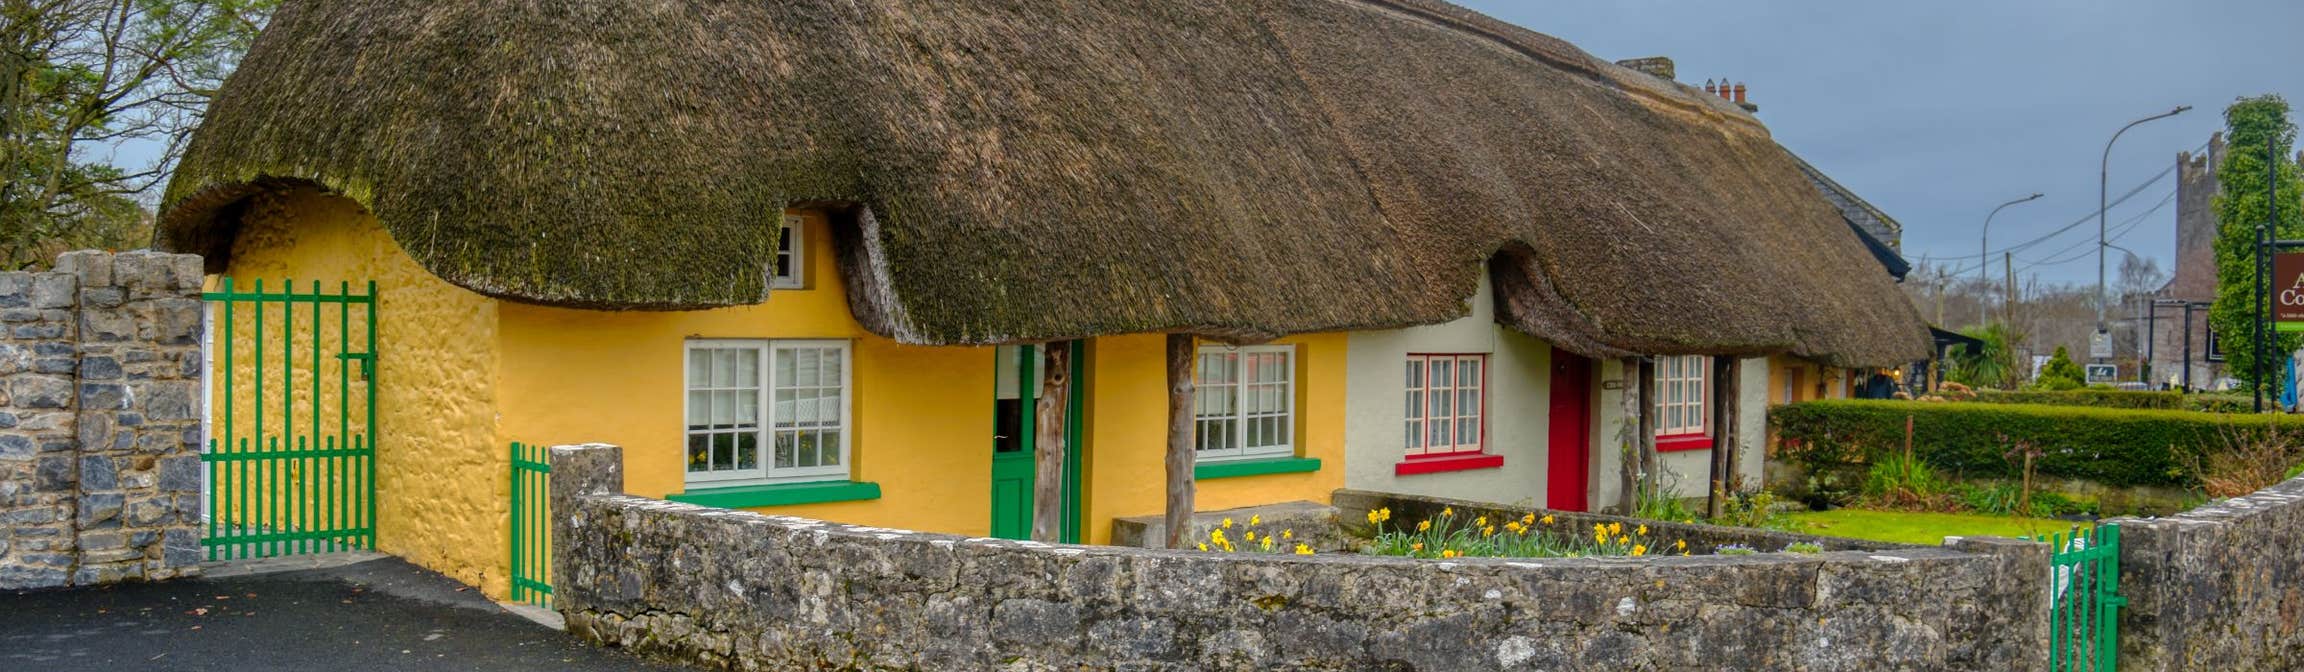 Image of thatched cottage in Adare in County Limerick